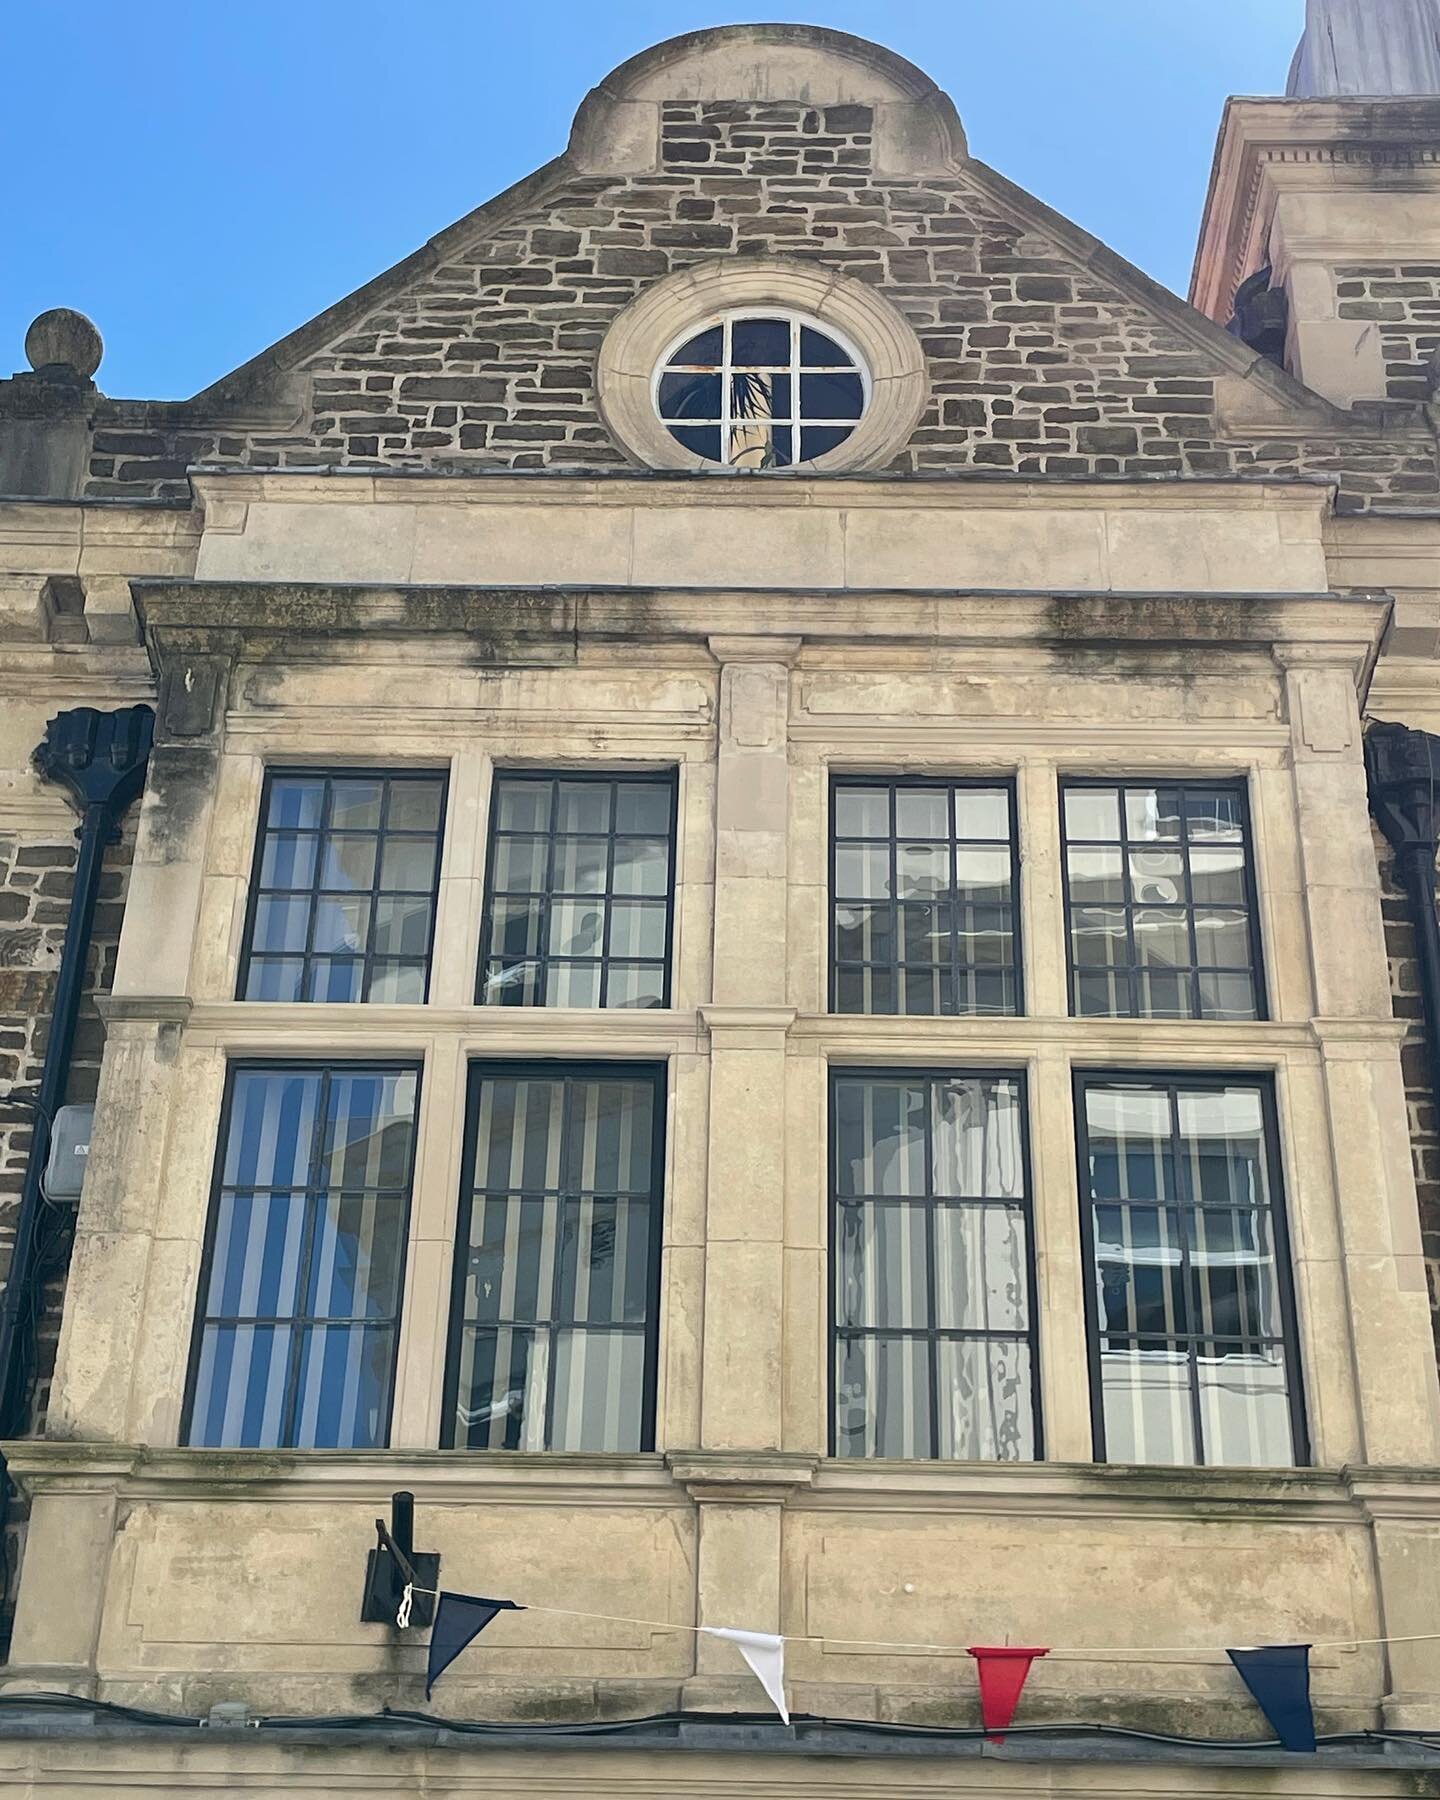 It was great to revisit a project this week in the Isle of Man. Great weather too! #douglas #isleofman #townhall #glazing #heritage #listedproperty #heritageglazing #windows #stonemullions #bespoke